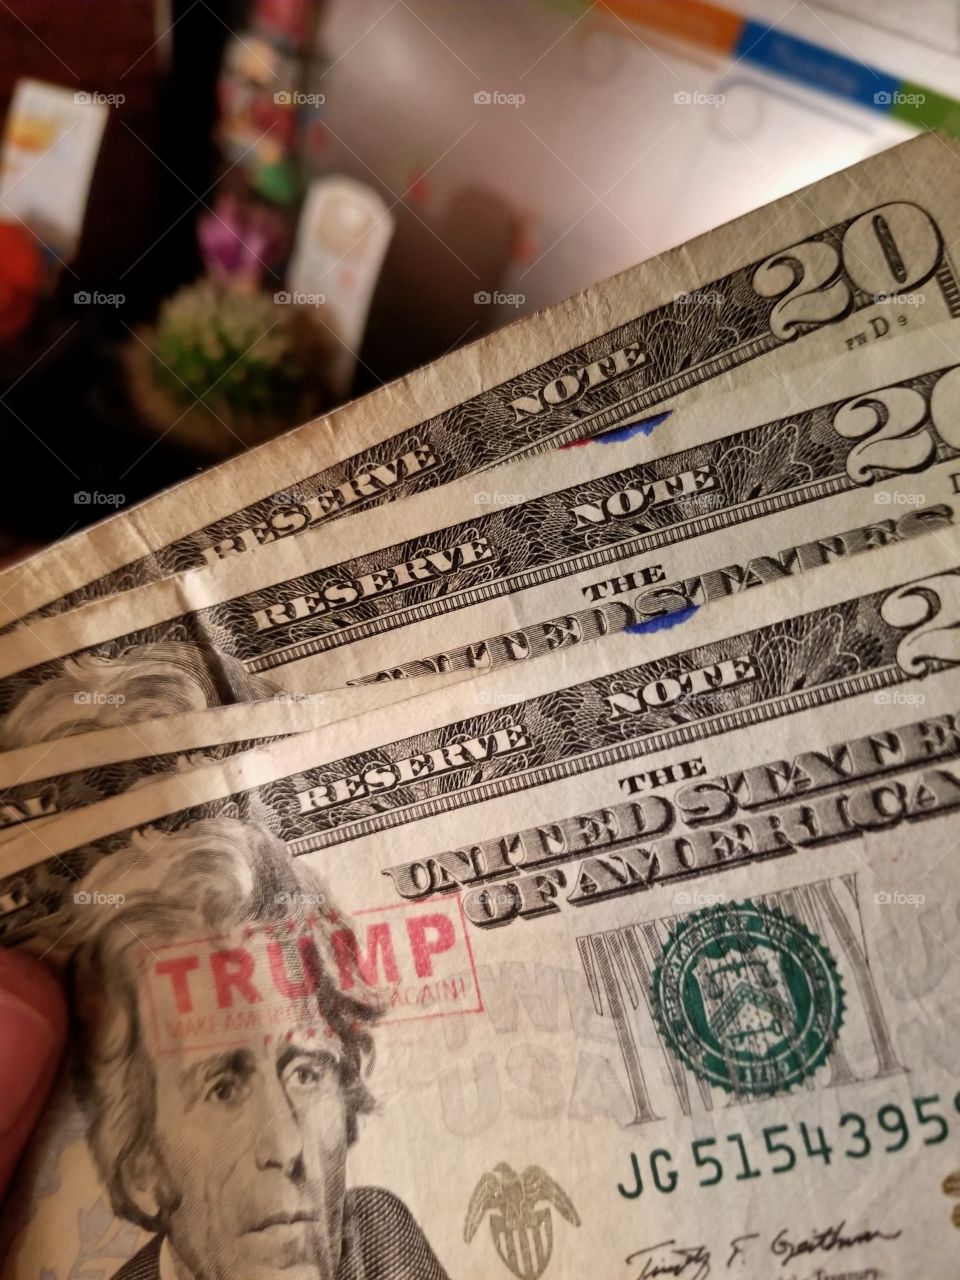 So I got this...20 dollar bill with President Trumps Make America Great stamp